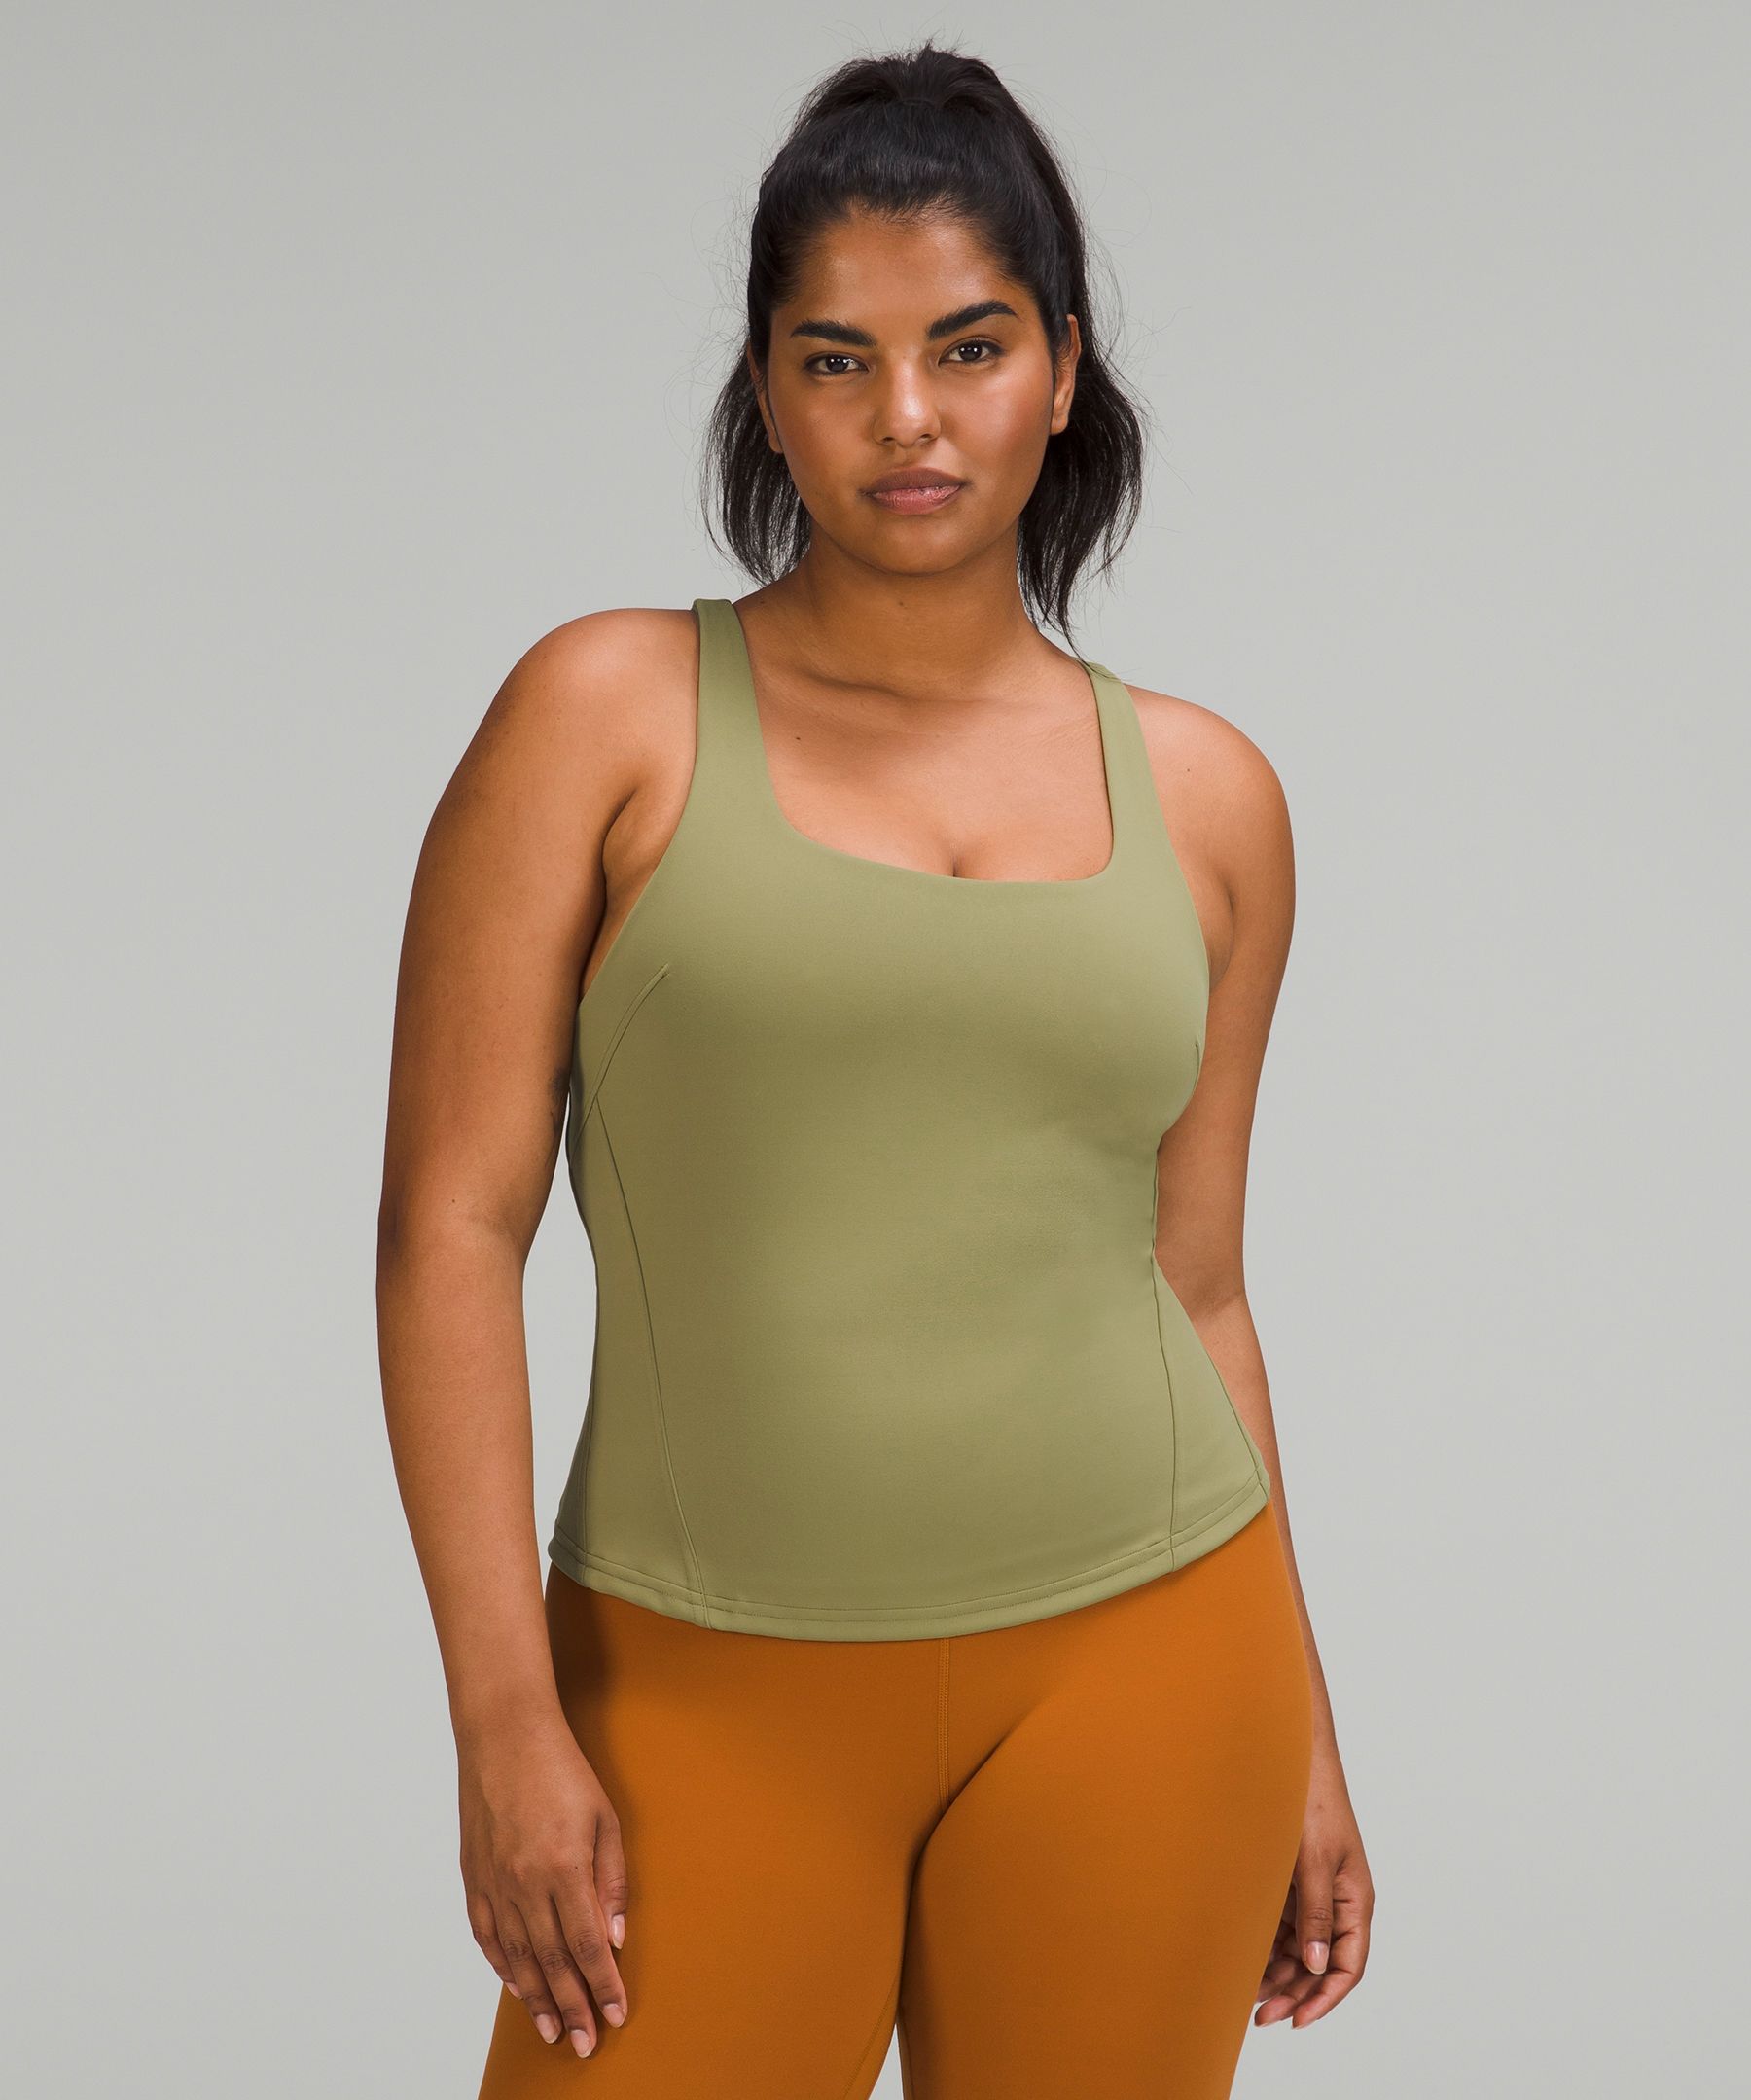 Pre-Owned Lululemon Athletica Womens Size 4 Active India